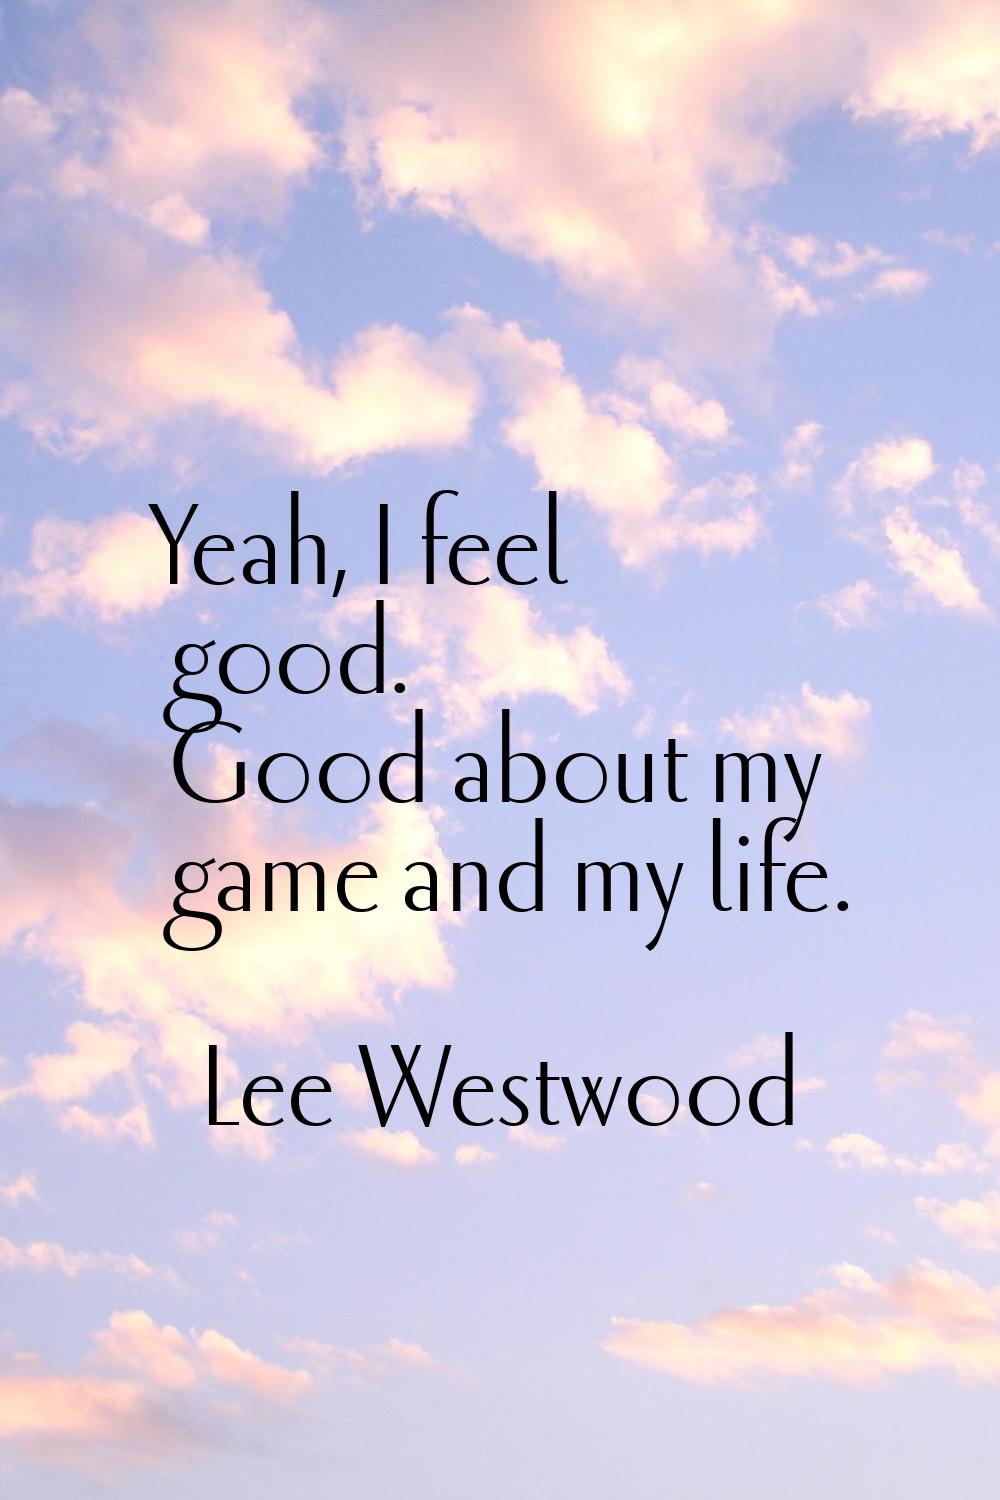 Yeah, I feel good. Good about my game and my life.